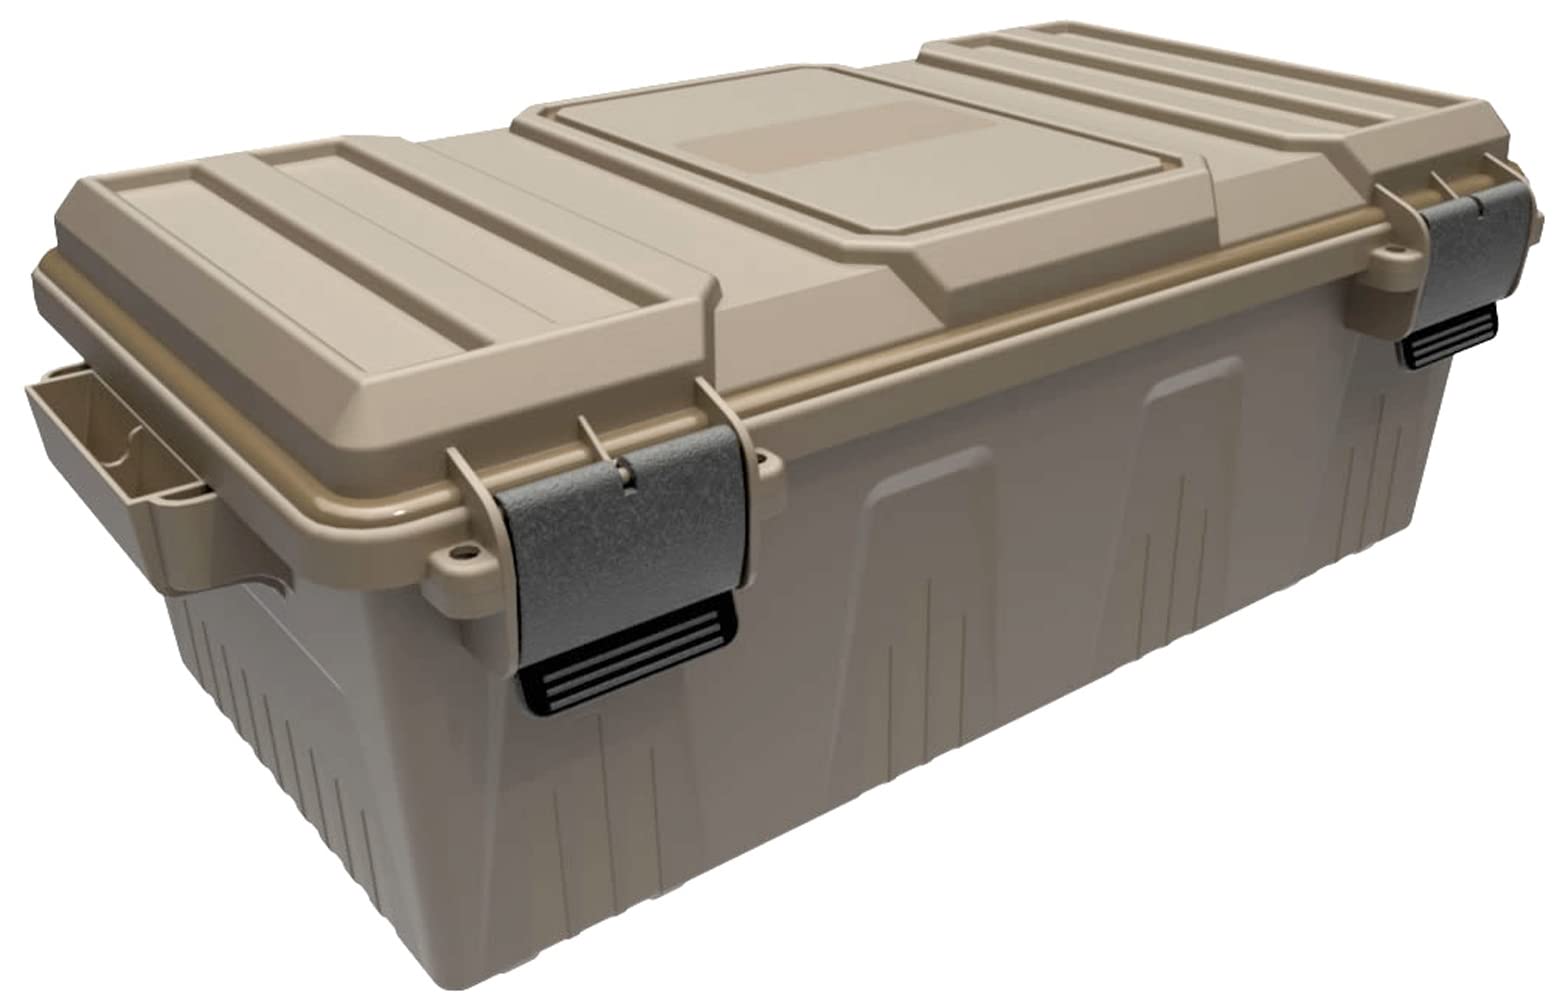 MTM Divided Ammo Crate Utility Box, Dark Earth